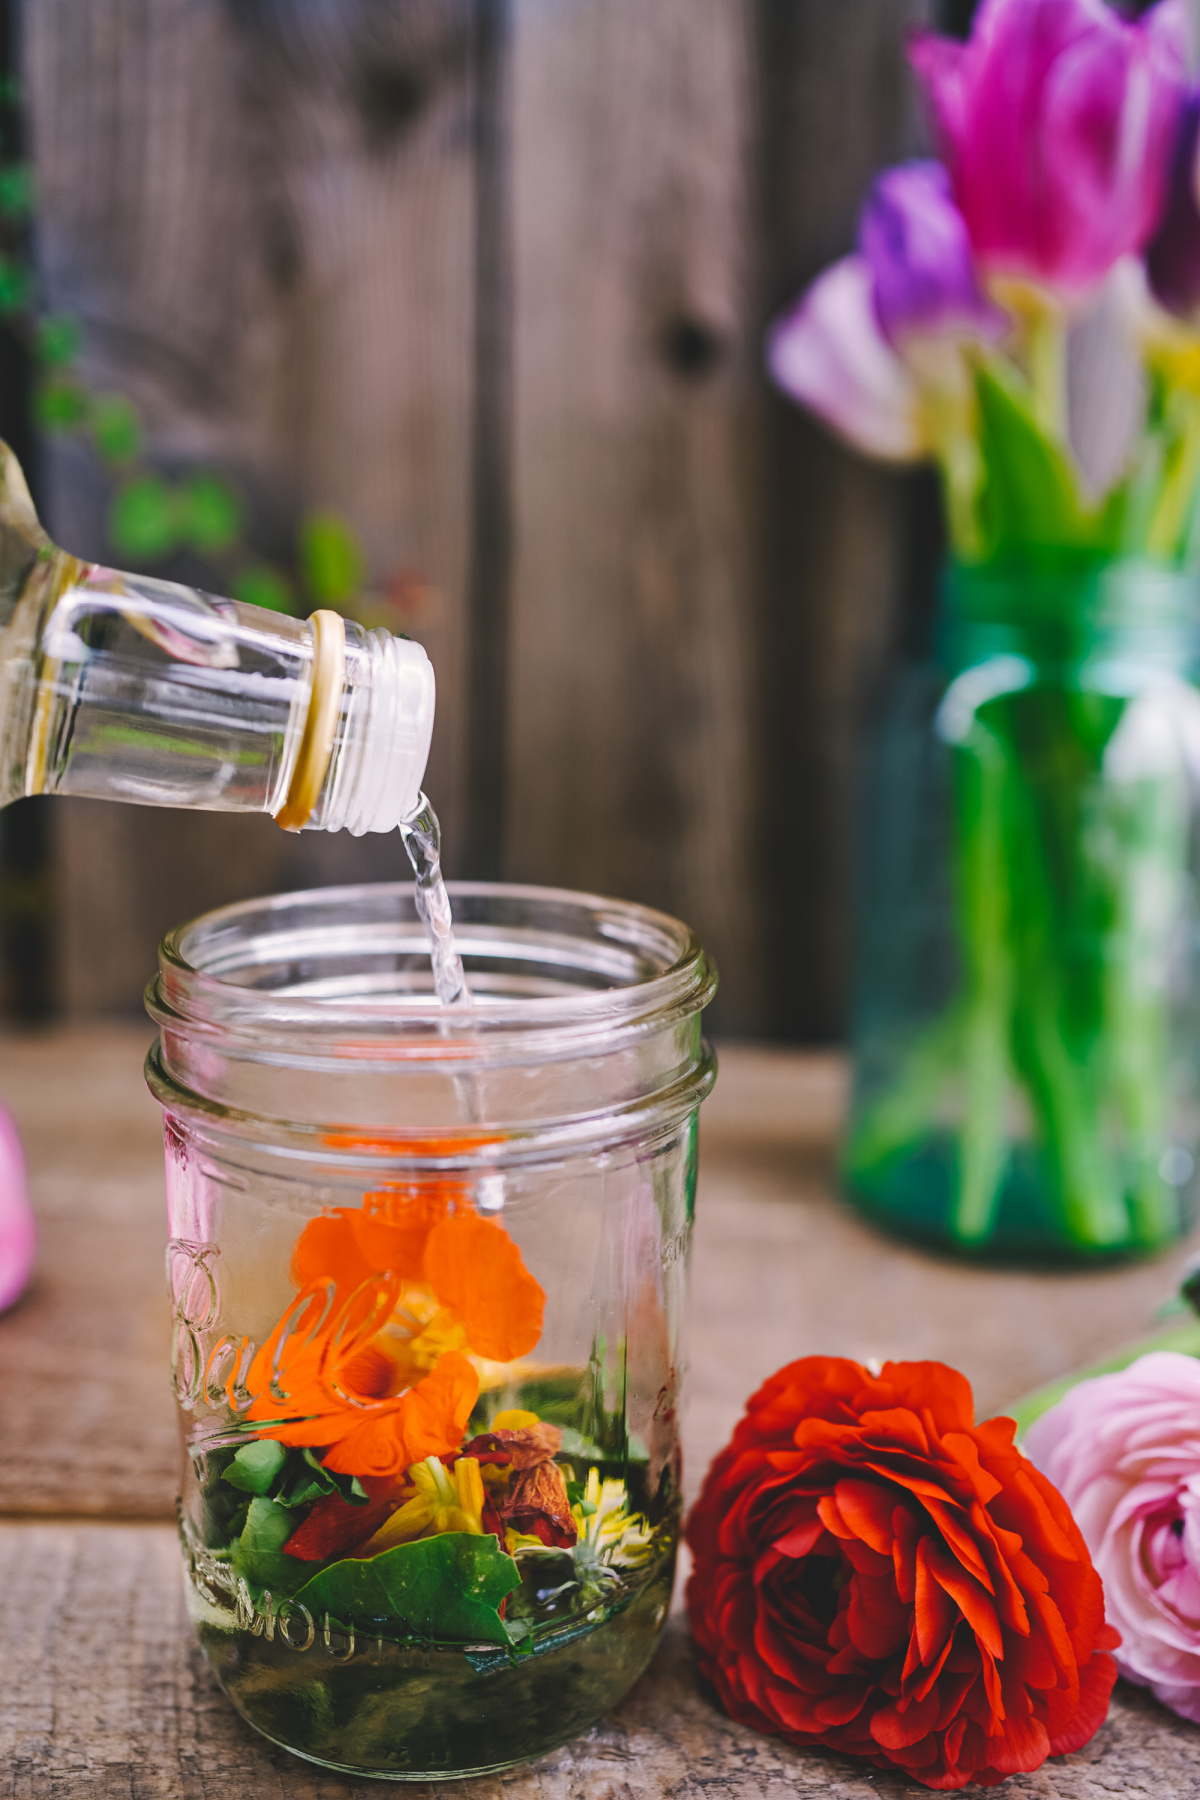 pouring white vinegar over flowers in a jar